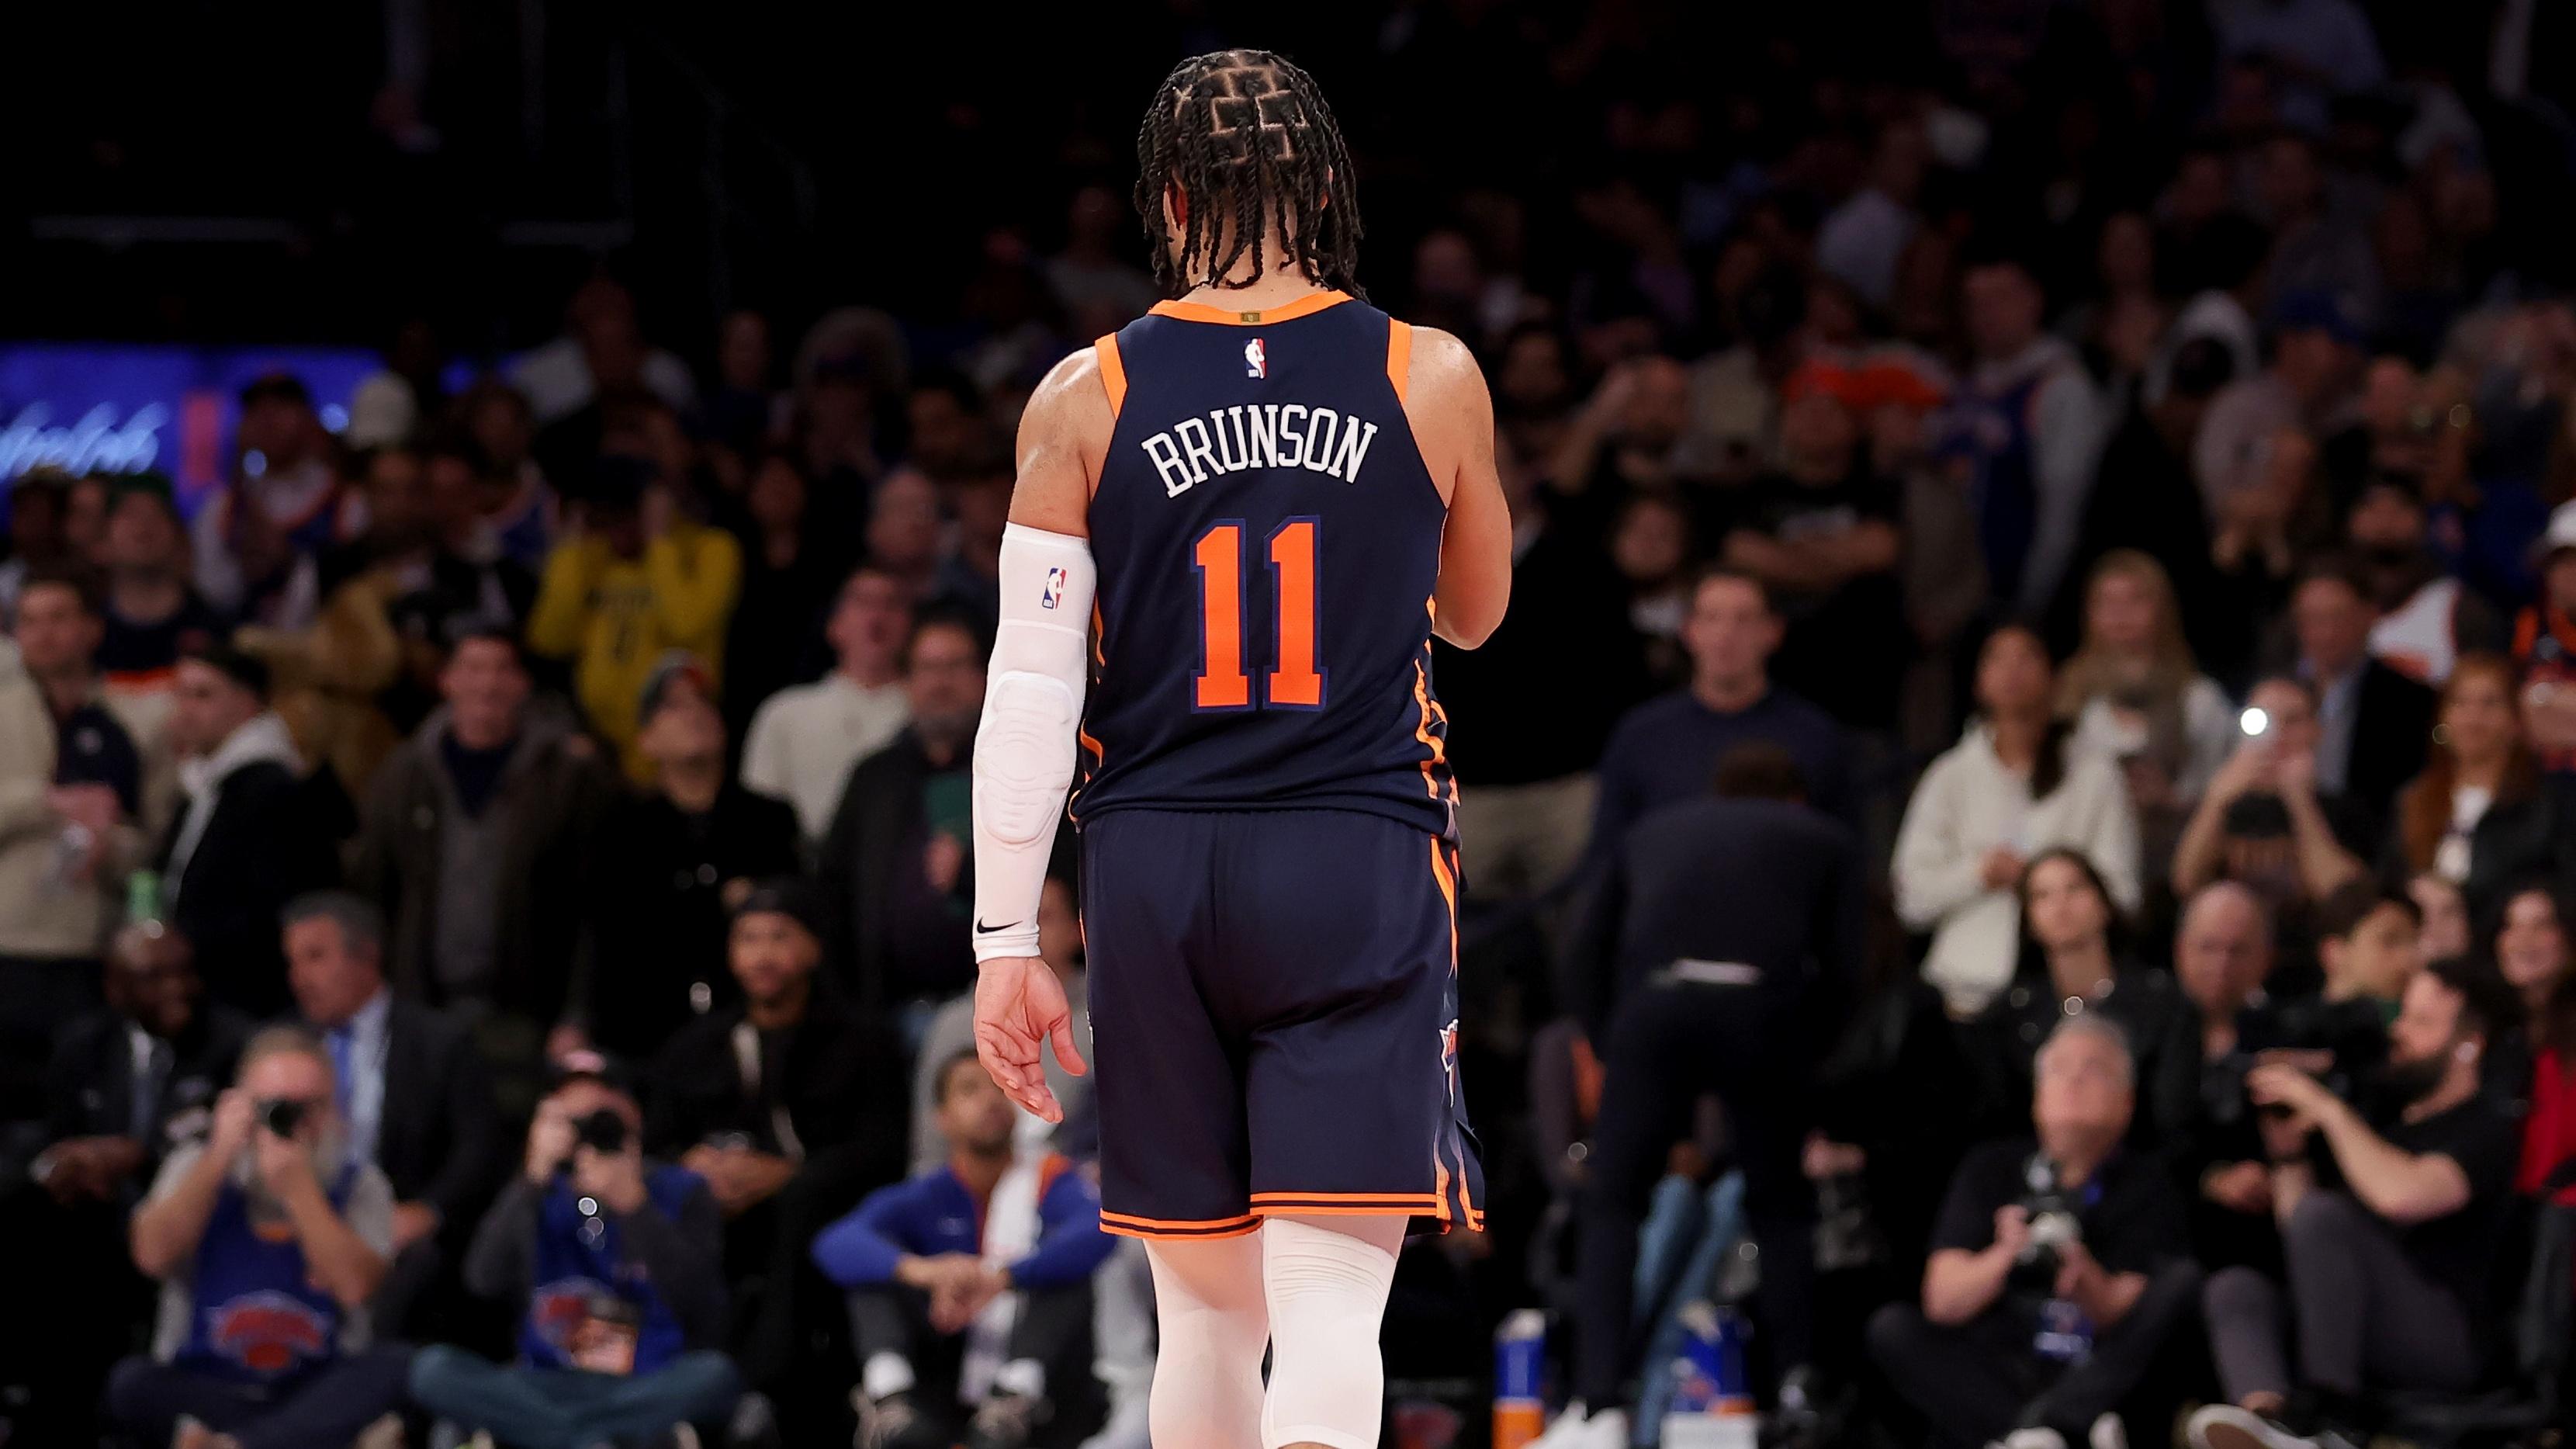 New York Knicks guard Jalen Brunson (11) during the fourth quarter against the Indiana Pacers at Madison Square Garden / Brad Penner - USA TODAY Sports